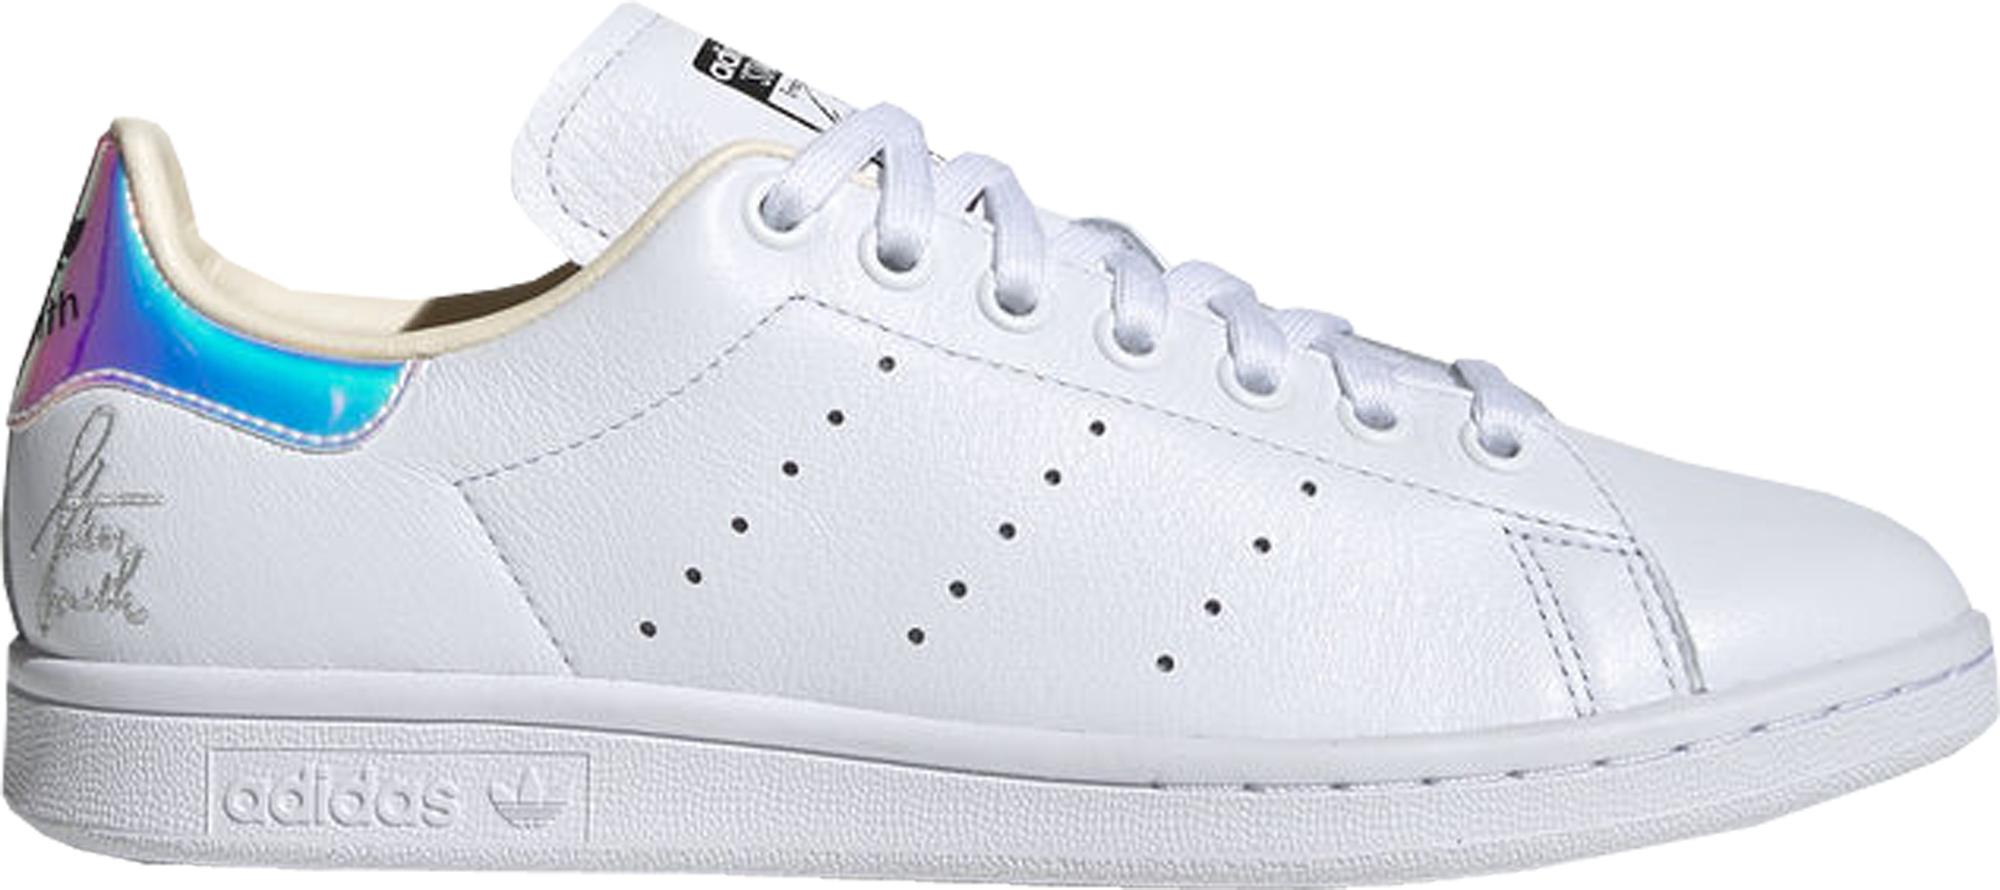 Stan Smith Cali Palm Iridescent Flash Sales, 52% OFF | lagence.tv